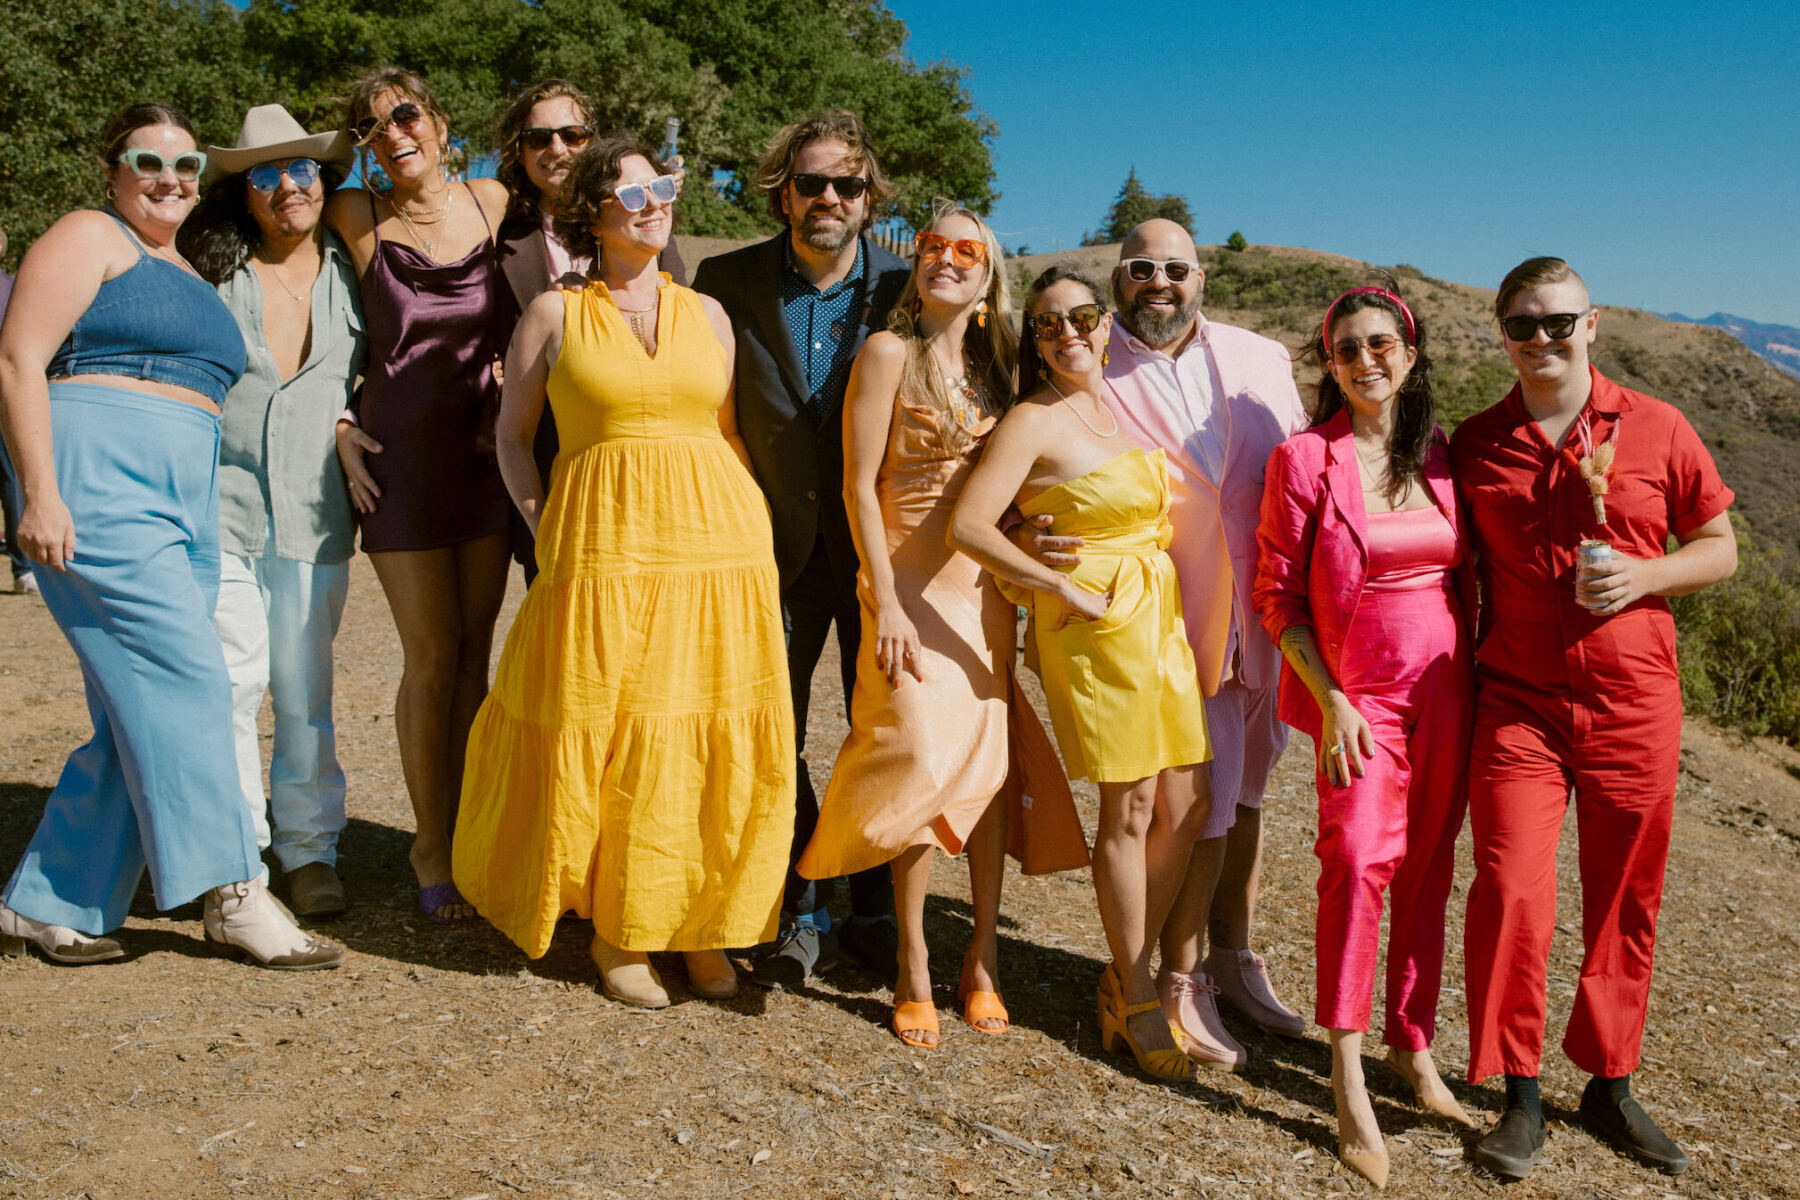 Guests at a Big Sur wedding were asked to wear colorful monochromatic attire. Here, a group of attendees in their bold hues.